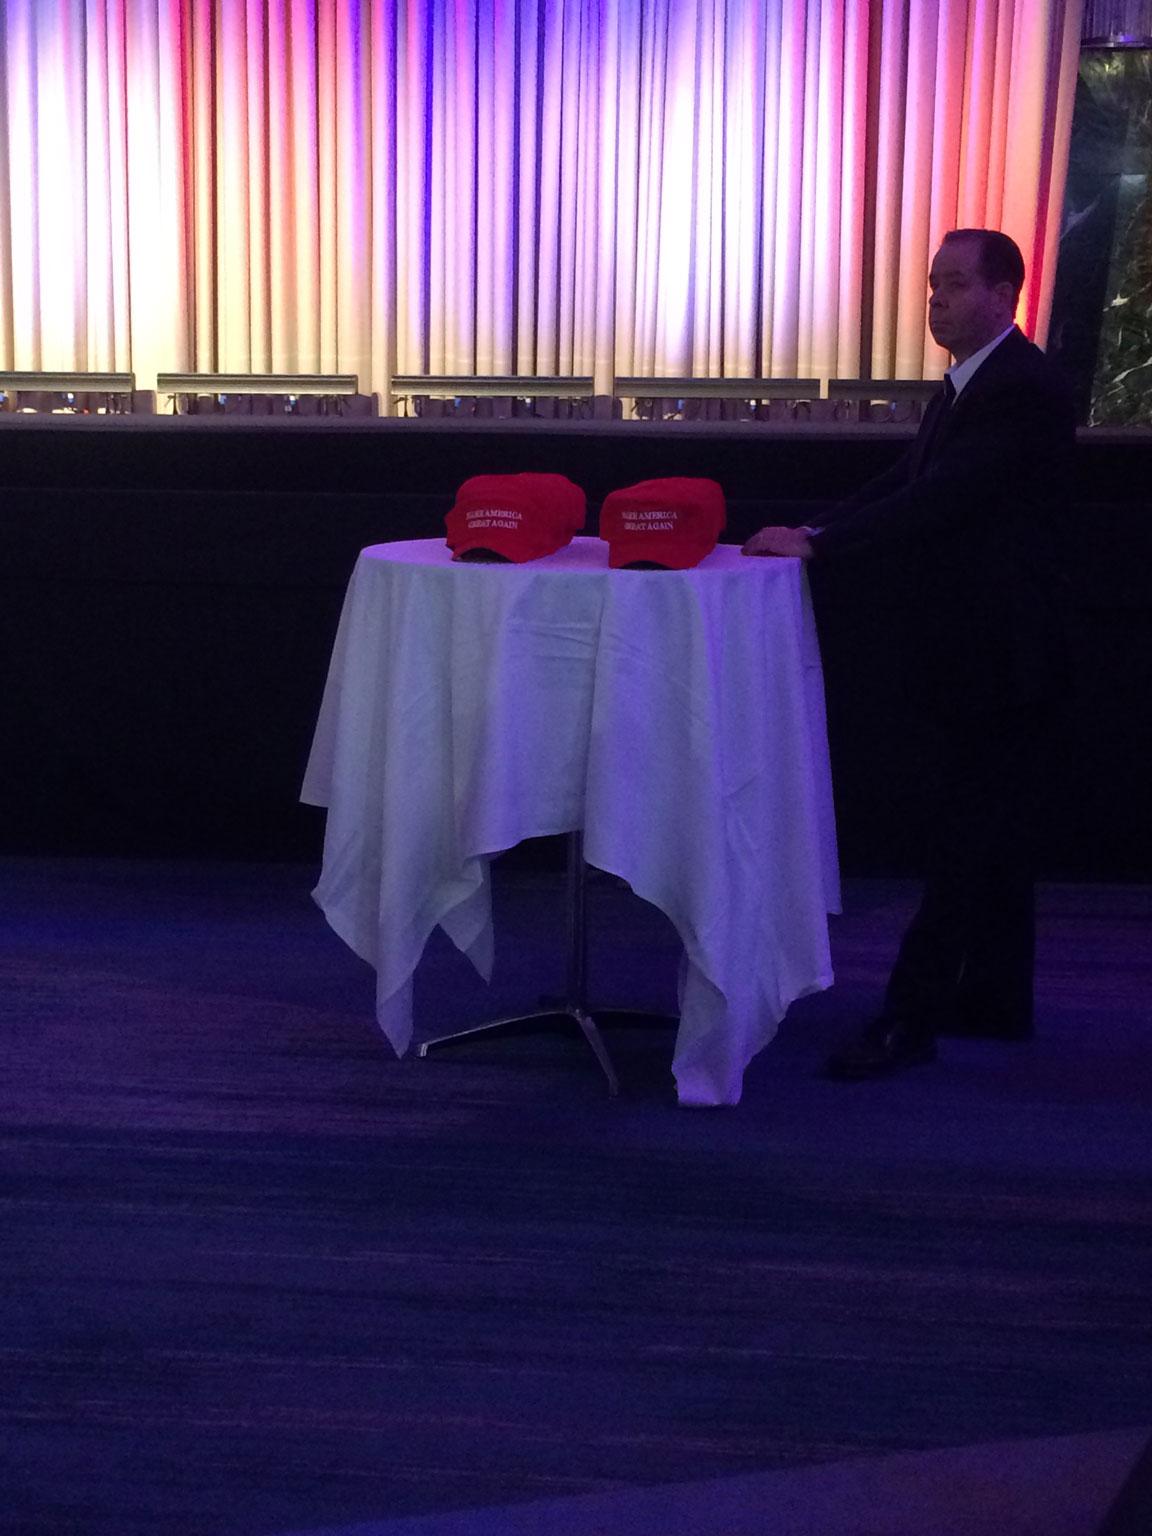 A man accompanies a table of hats before the party built momentum